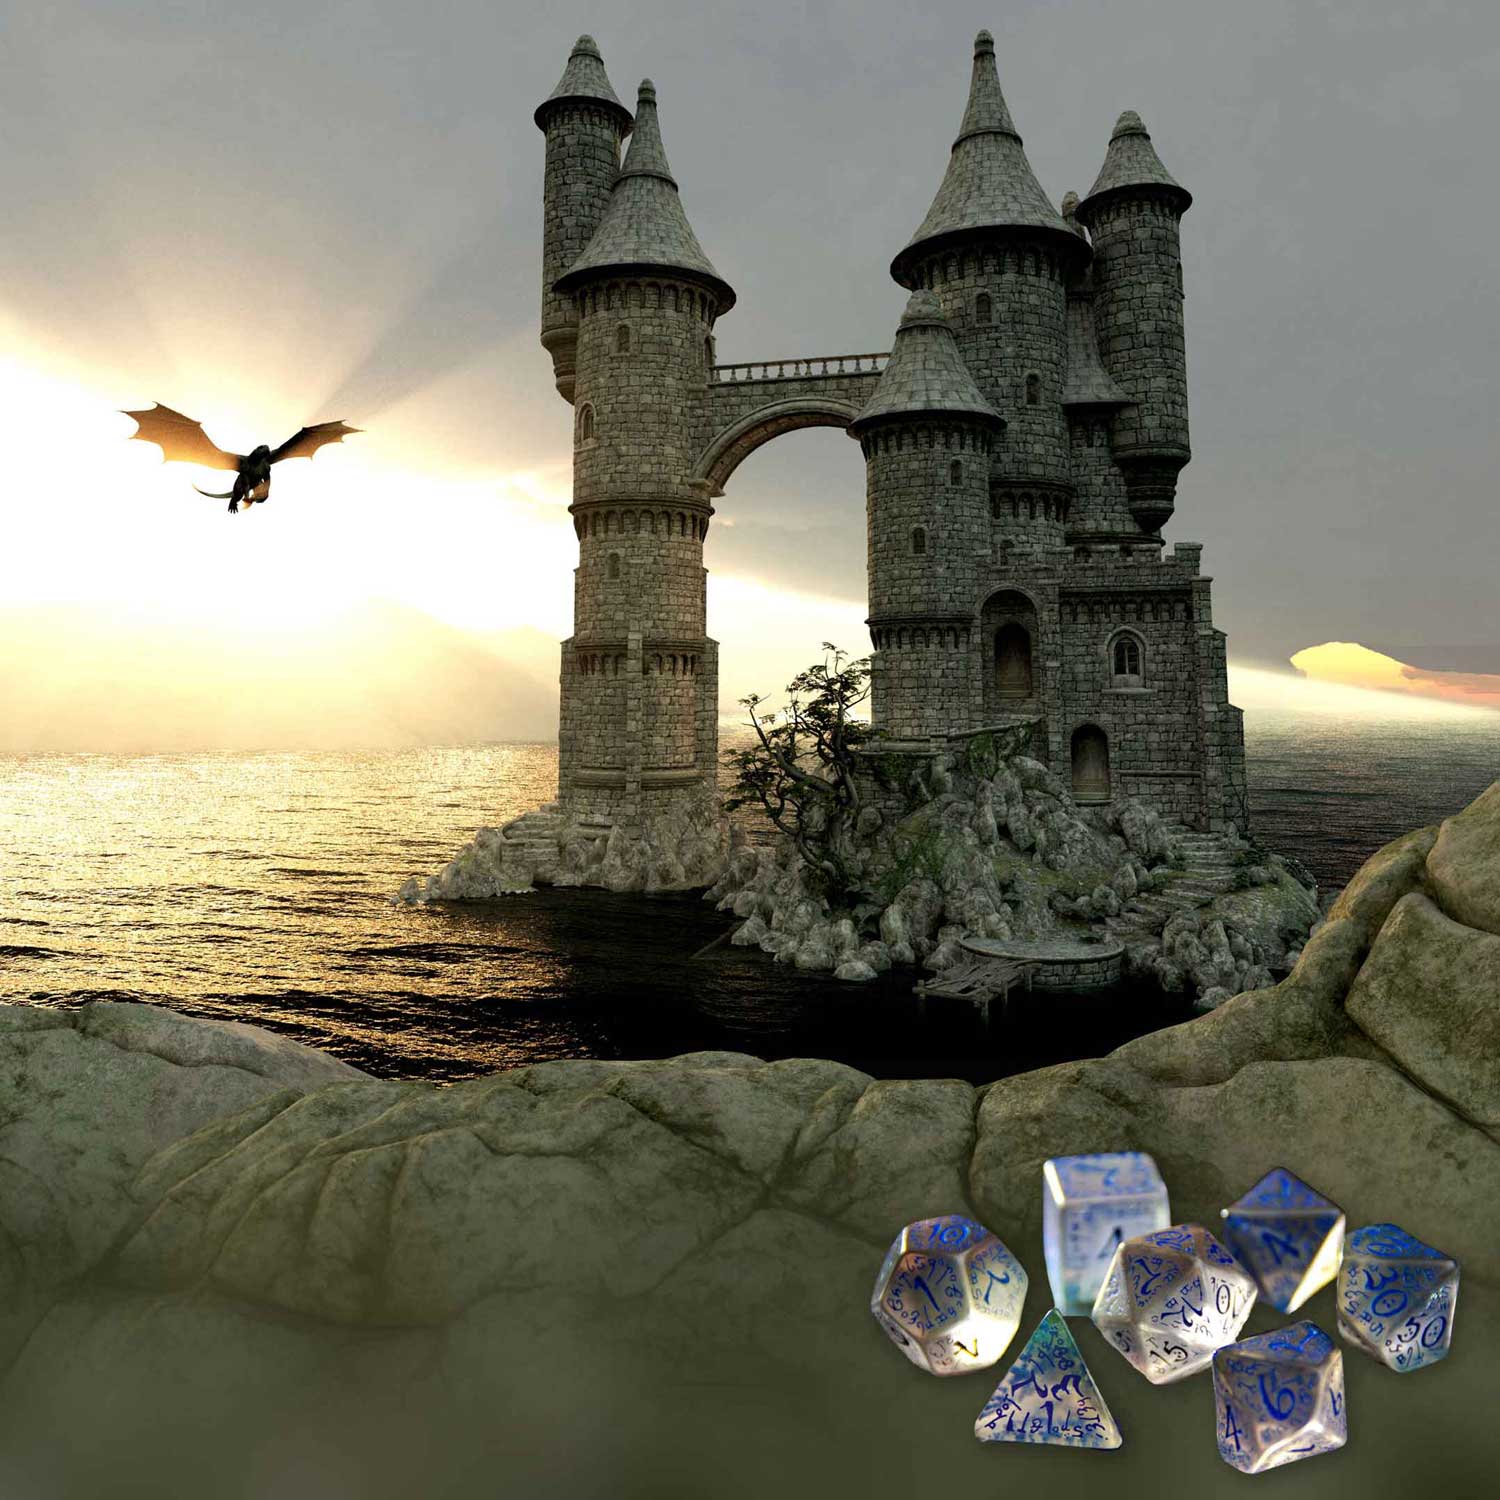 A castle next to the ocean with a dragon flying toward it and several D&D dice in the foreground.